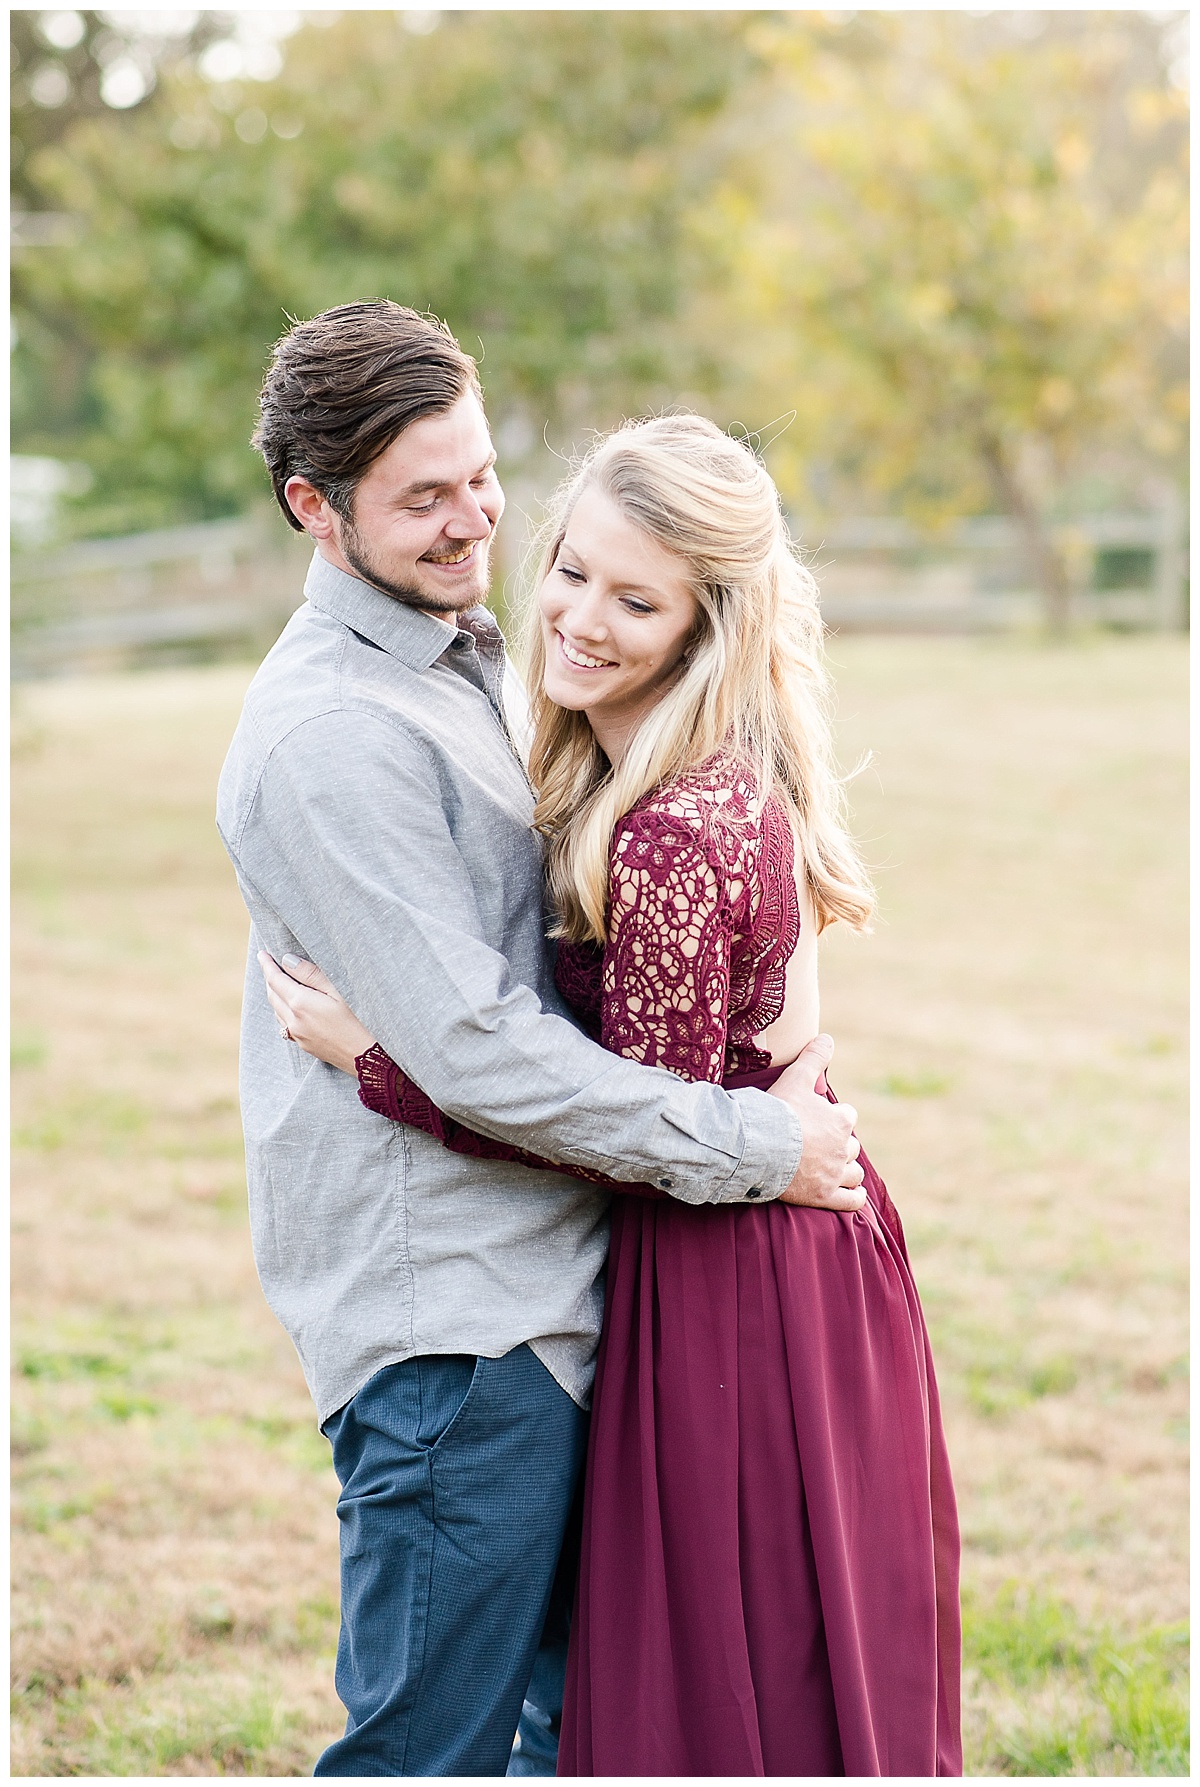 Prince George Engagement, Country Engagement Session, Barn Pictures, Engagement Pictures, Field Engagement, Burgundy lace dress, Lulu dress, Fall Engagement Photos, Engagement Photography, Fall Photos, Virginia Wedding Photographer, Prince George Photographer